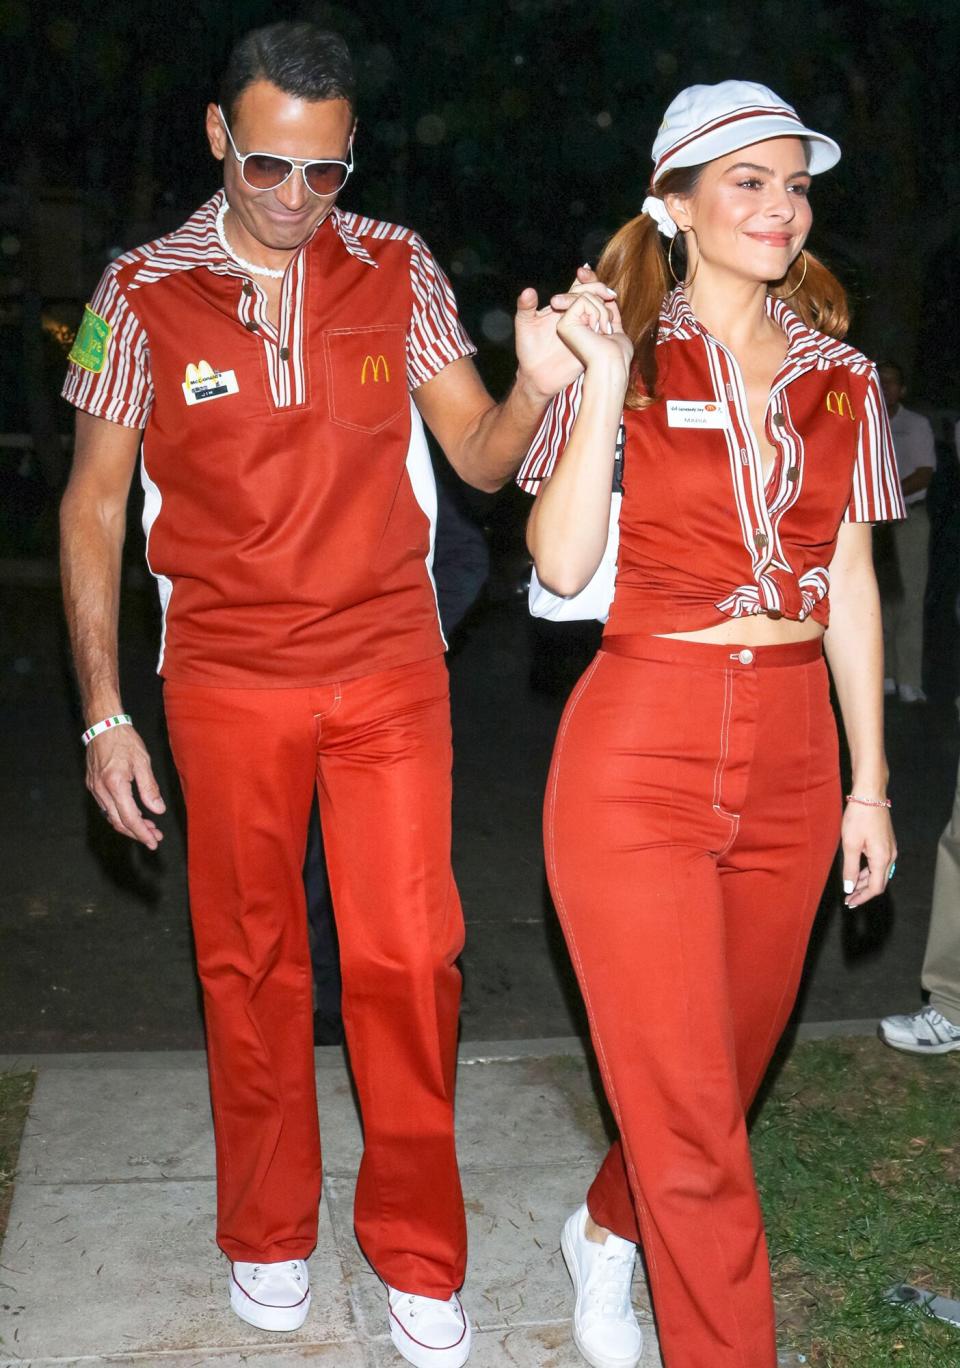 Maria Menounos and Keven Undergaro are seen on October 26, 2019 in Los Angeles, California